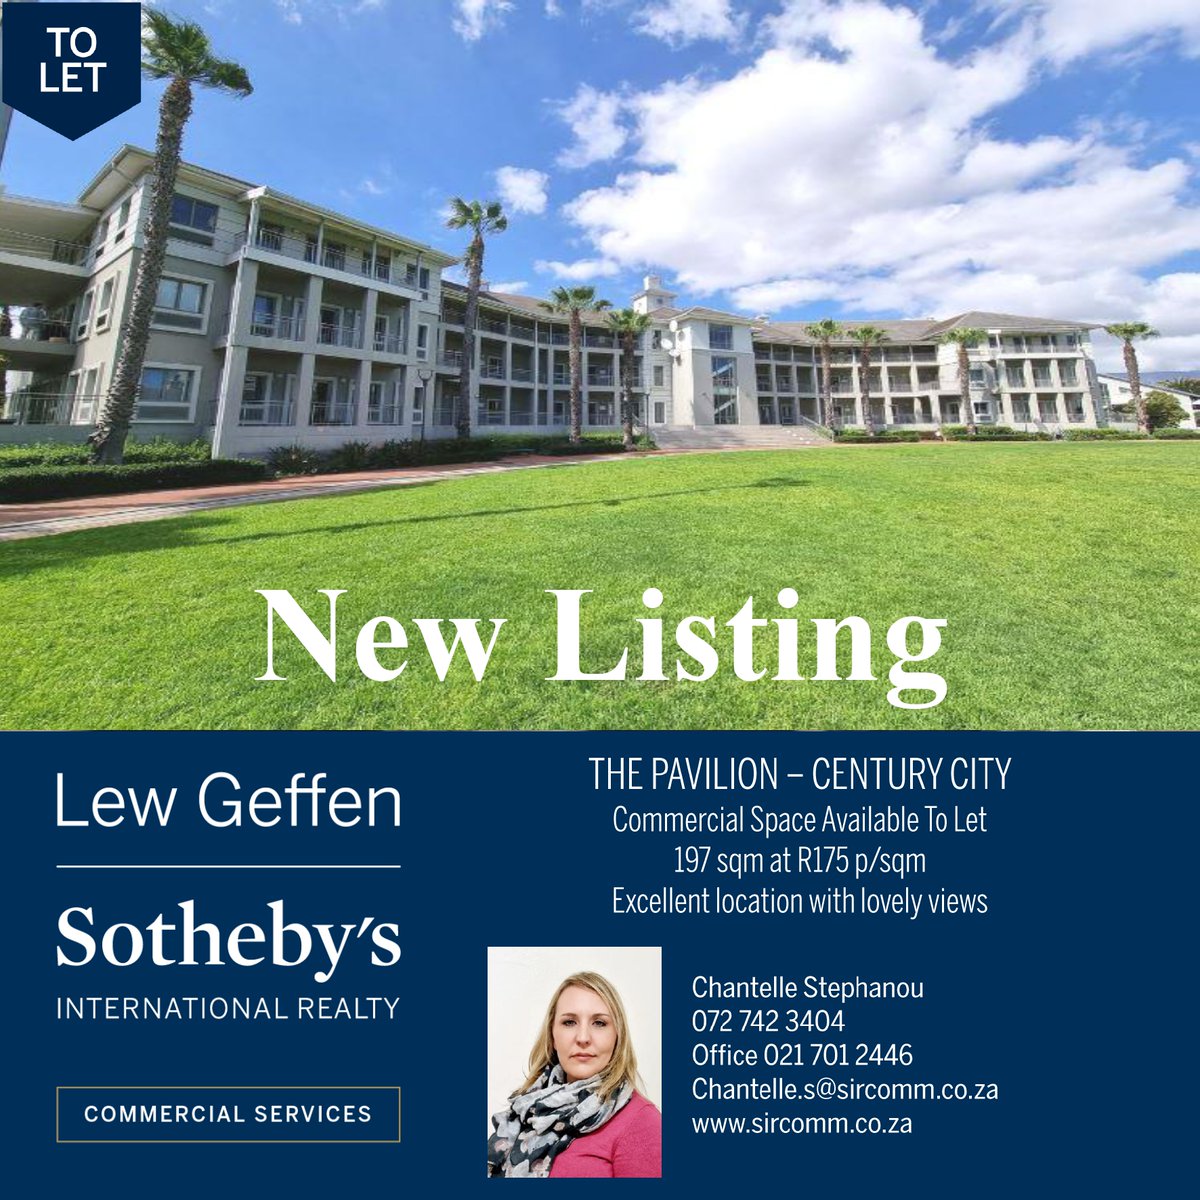 New Listing!!

Commercial Space To Let in Century City

Contact Chantelle Stephanou to view today!

sircomm.co.za/results/commer…

#newlisting #commercial #spacetolet #new #justdropped #CenturyCity #sircomm #sothebyscommercial #sothebysrealty #sothebys